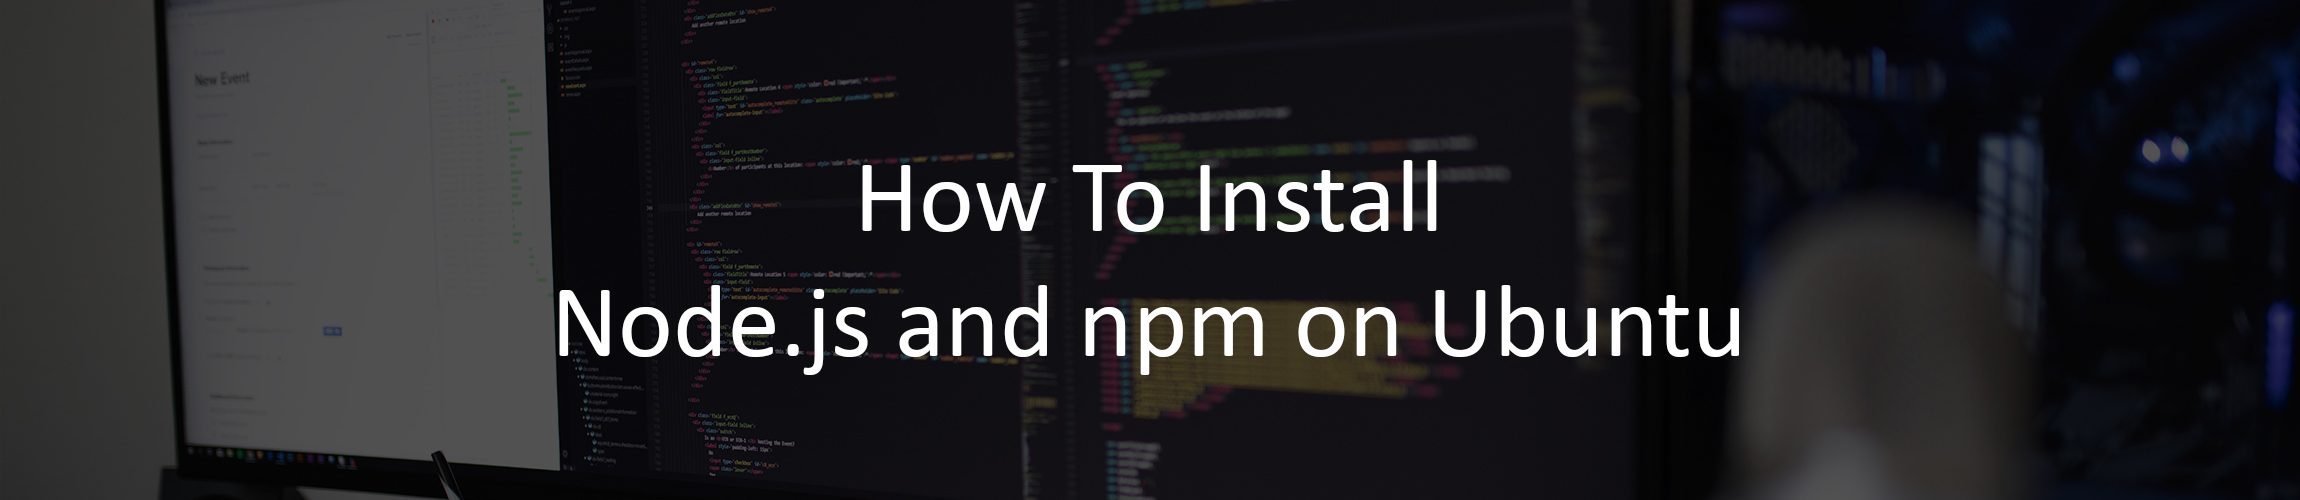 How To Install Node.js and npm on Ubuntu